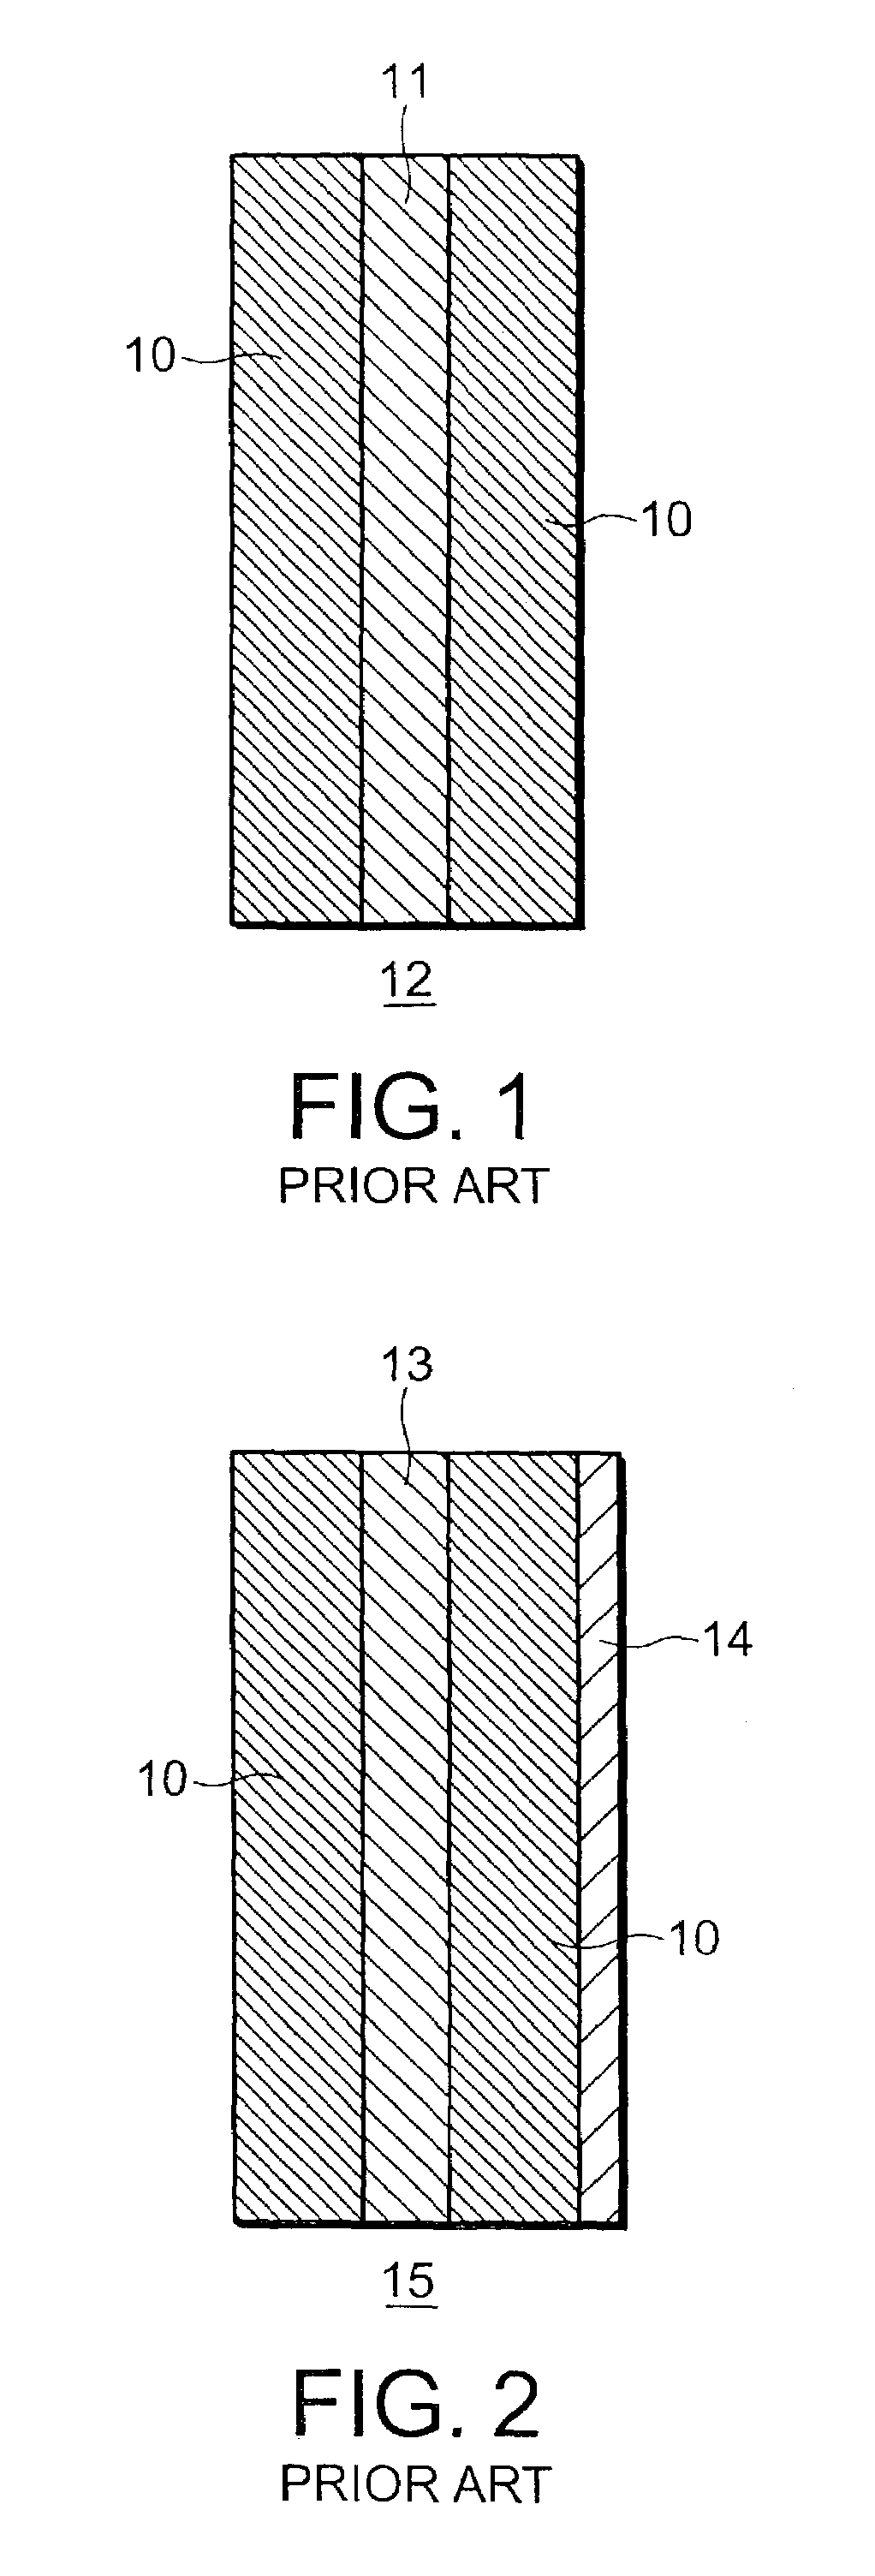 Fire-protection glass product with heat shielding characteristic and method for using the same